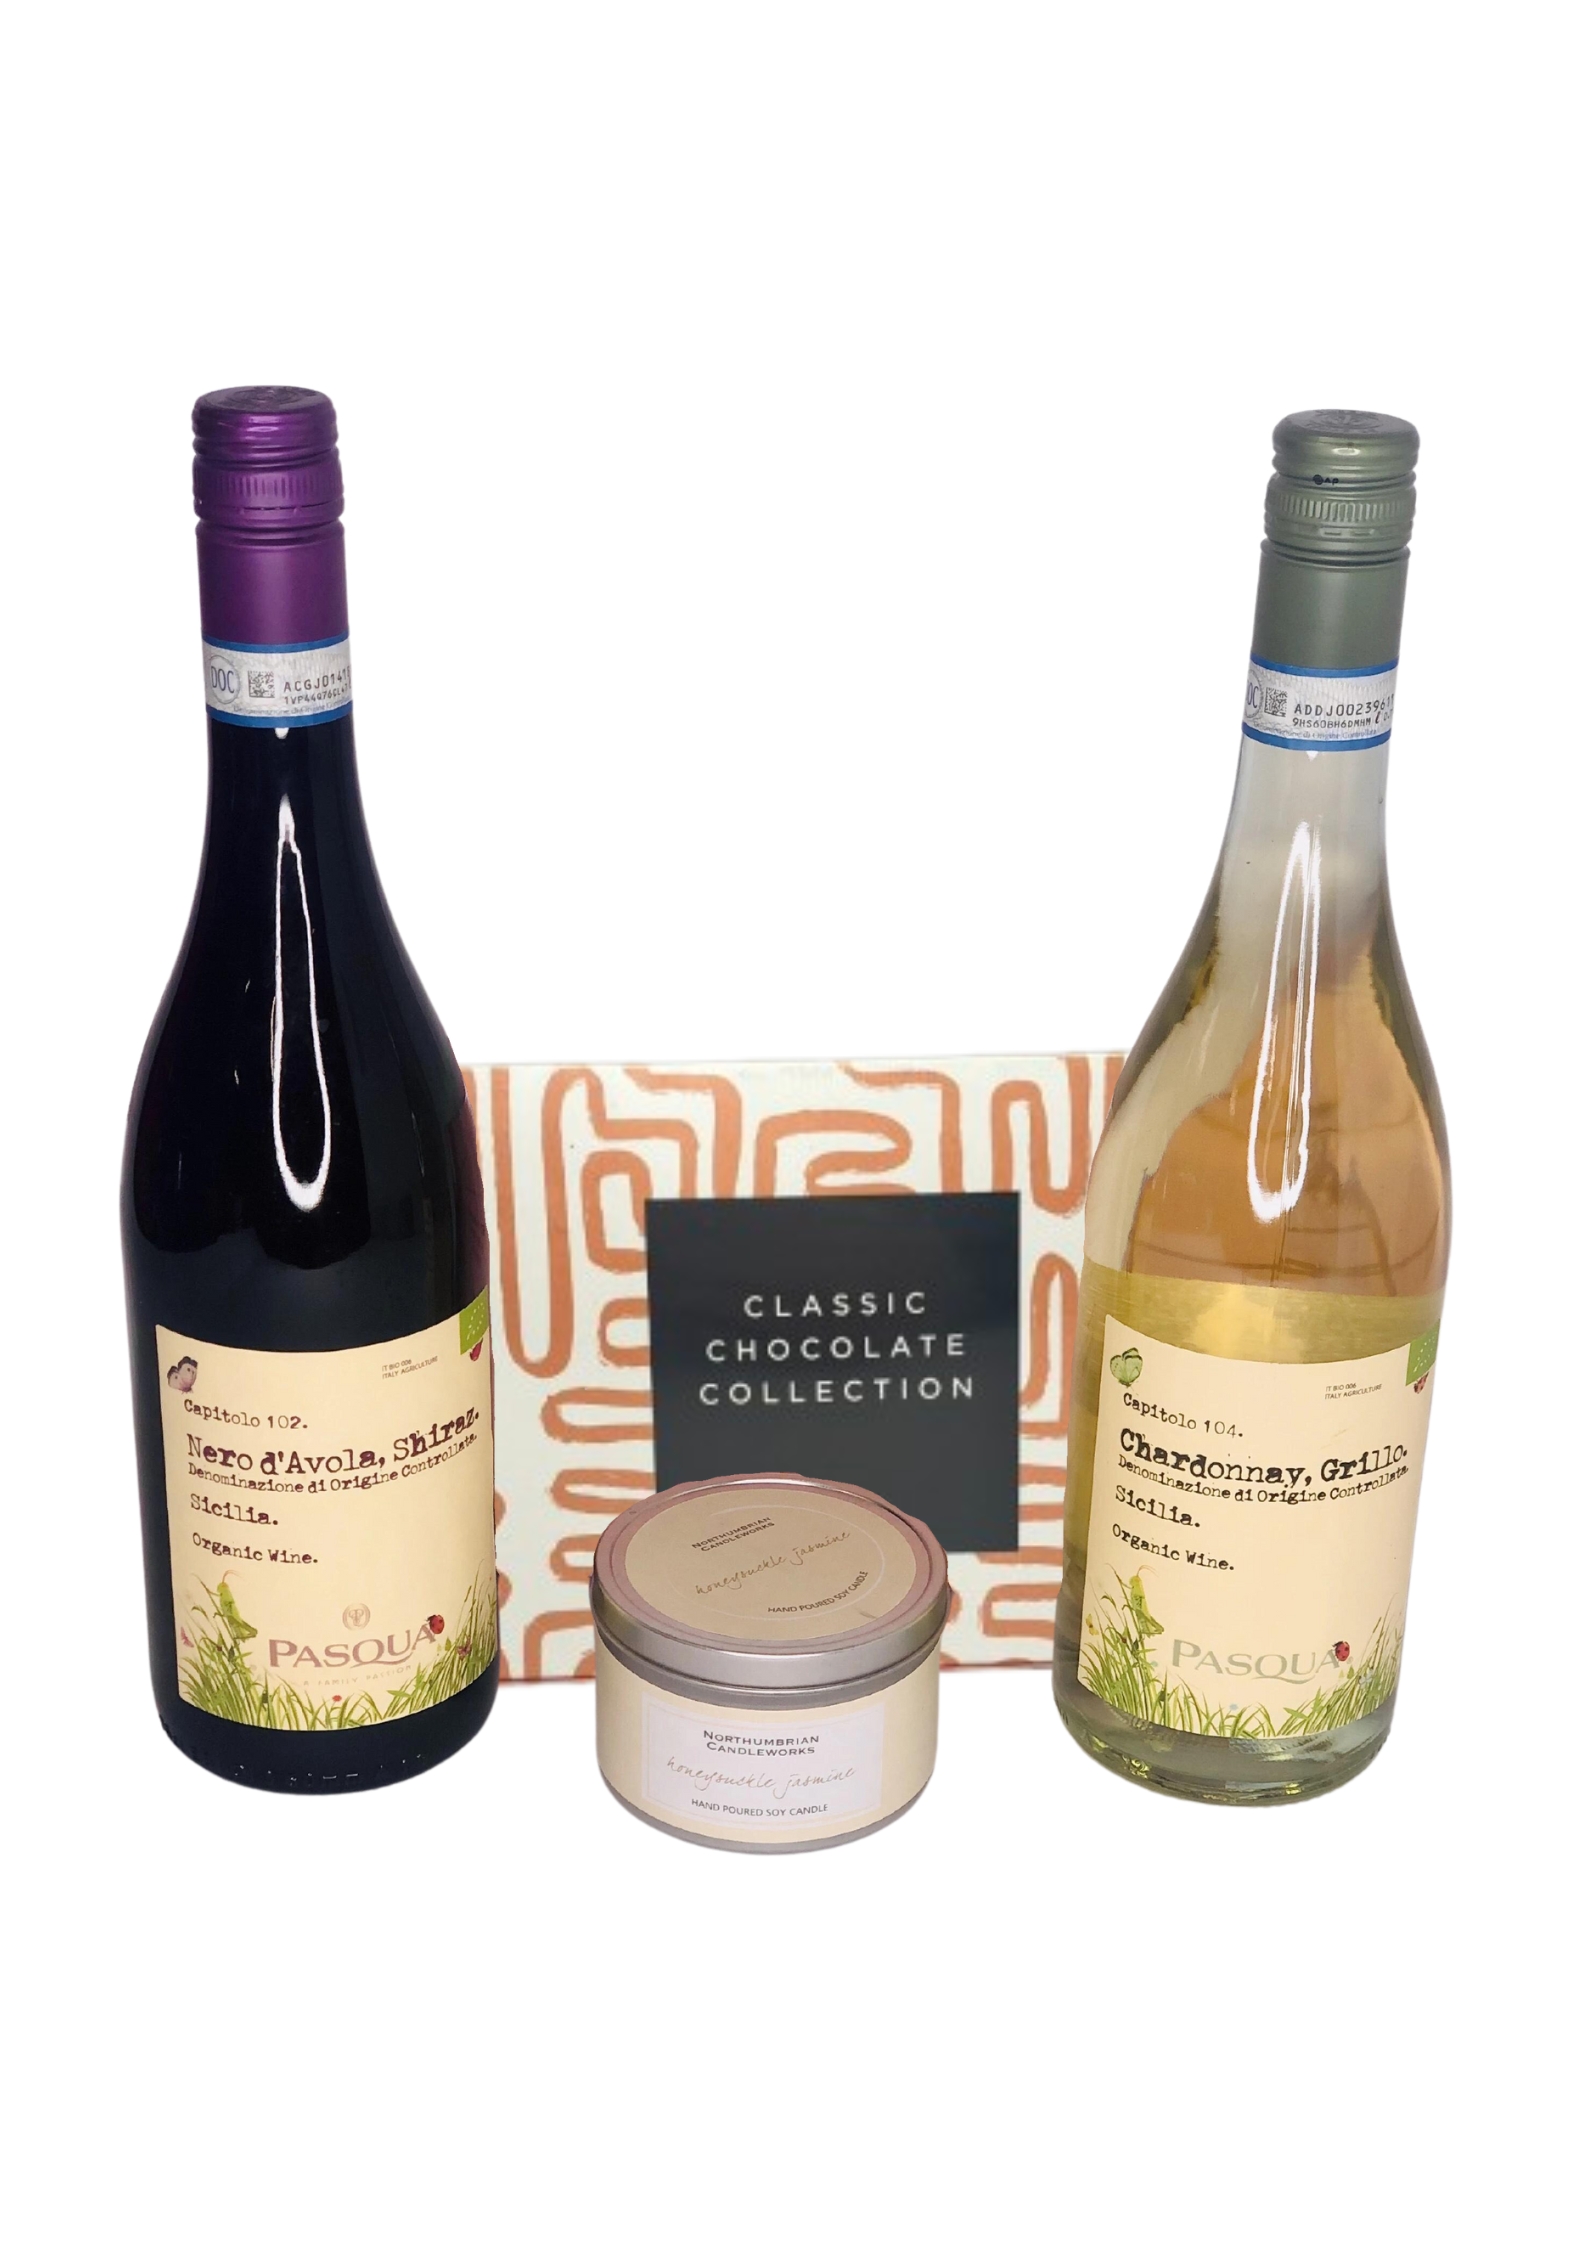 <p>Order this Wine Gift Set to celebrate any occasion and you will not be disappointed.  Containing, a bottle of White Wine, Red Wine, a box of Maison Fougere Salted Caramel Truffles together with an eco-friendly Soy Scented Candle beautifully presented in a stylish Gift Box.</p>
<br>
<h2>Gift Delivery Coverage</h2>
<p>Our shop delivers flowers and gifts to the following Liverpool postcodes L1 L2 L3 L4 L5 L6 L7 L8 L11 L12 L13 L14 L15 L16 L17 L18 L19 L24 L25 L26 L27 L36 L70 ONLY.  If your order is for an area outside unfortunately we cannot process your order because of the difference in stock at other florists.</p>
<br>
<h2>Alcohol Gifts</h2>
<p>As a licensed florist, we are able to supply alcoholic drinks either as a gift on their own or with flowers. We have carefully selected a range that we know you will love either as a gift in itself or to provide that extra bit of celebratory luxury to a floral gift.</p>
<p>This Gift Set contains a 75cl bottle of White Orchid Sauvignon Blanc Wine, a 75cl bottle of Red Orchid Merlot Wine together with a box of 170g Maison Fougere Salted Caramel Chocolate Truffles in a stylish gift box and a locally made eco-friendly Northumbrian Scented Soy Candle in a stylish tin.</p>
<p>Have this giftset delivered to someone special to celebrate as an alternative to having flowers delivered, or have it delivered with your flowers to really celebrate!</p>
<br>
<h2>Online Gift Ordering | Online Gift Delivery</h2>
<p>Through this website you can order 24 hours, Booker Gifts and Gifts Liverpool have put together this carefully selected range of Flowers, Gifts and Finishing Touches to make Gift ordering as easy as possible. This means even if you do not live in Liverpool we make it easy for you to see what you are getting when buying for delivery in Liverpool.</p>
<br>
<h2>Liverpool Flower and Gift Delivery</h2>
<p>We are open 7 days a week and offer advanced booking flower delivery, same-day flower delivery, Guaranteed AM Flower Delivery and also offer Sunday Flower Delivery.</p>
<p>Our florists Deliver in Liverpool and can provide flowers for you in Liverpool, Merseyside. And through our network of florists can organise flower deliveries for you nationwide.</p>
<br>
<h2>Beautiful Gifts Delivered | Best Florist in Liverpool</h2>
<p>Having been nominated the Best Florist in Liverpool by the independent Three Best Rated for the 5th year running you can feel secure with us</p>
<p>You can trust Booker Gifts and Gifts to deliver the very best for you.</p>
<br>
<h2>5 Star Google Review</h2>
<p><em>So Pleased with the product and service received. I am working away currently, so ordered online, and after my own misunderstanding with online payment, I contacted the florist directly to query. Gemma was very prompt and helpful, and my flowers were arranged easily. They arrived this morning and were as impactful as the pictures on the website, and the quality of the flowers and the arrangement were excellent. Great Work! David Welsh</em></p>
<br>